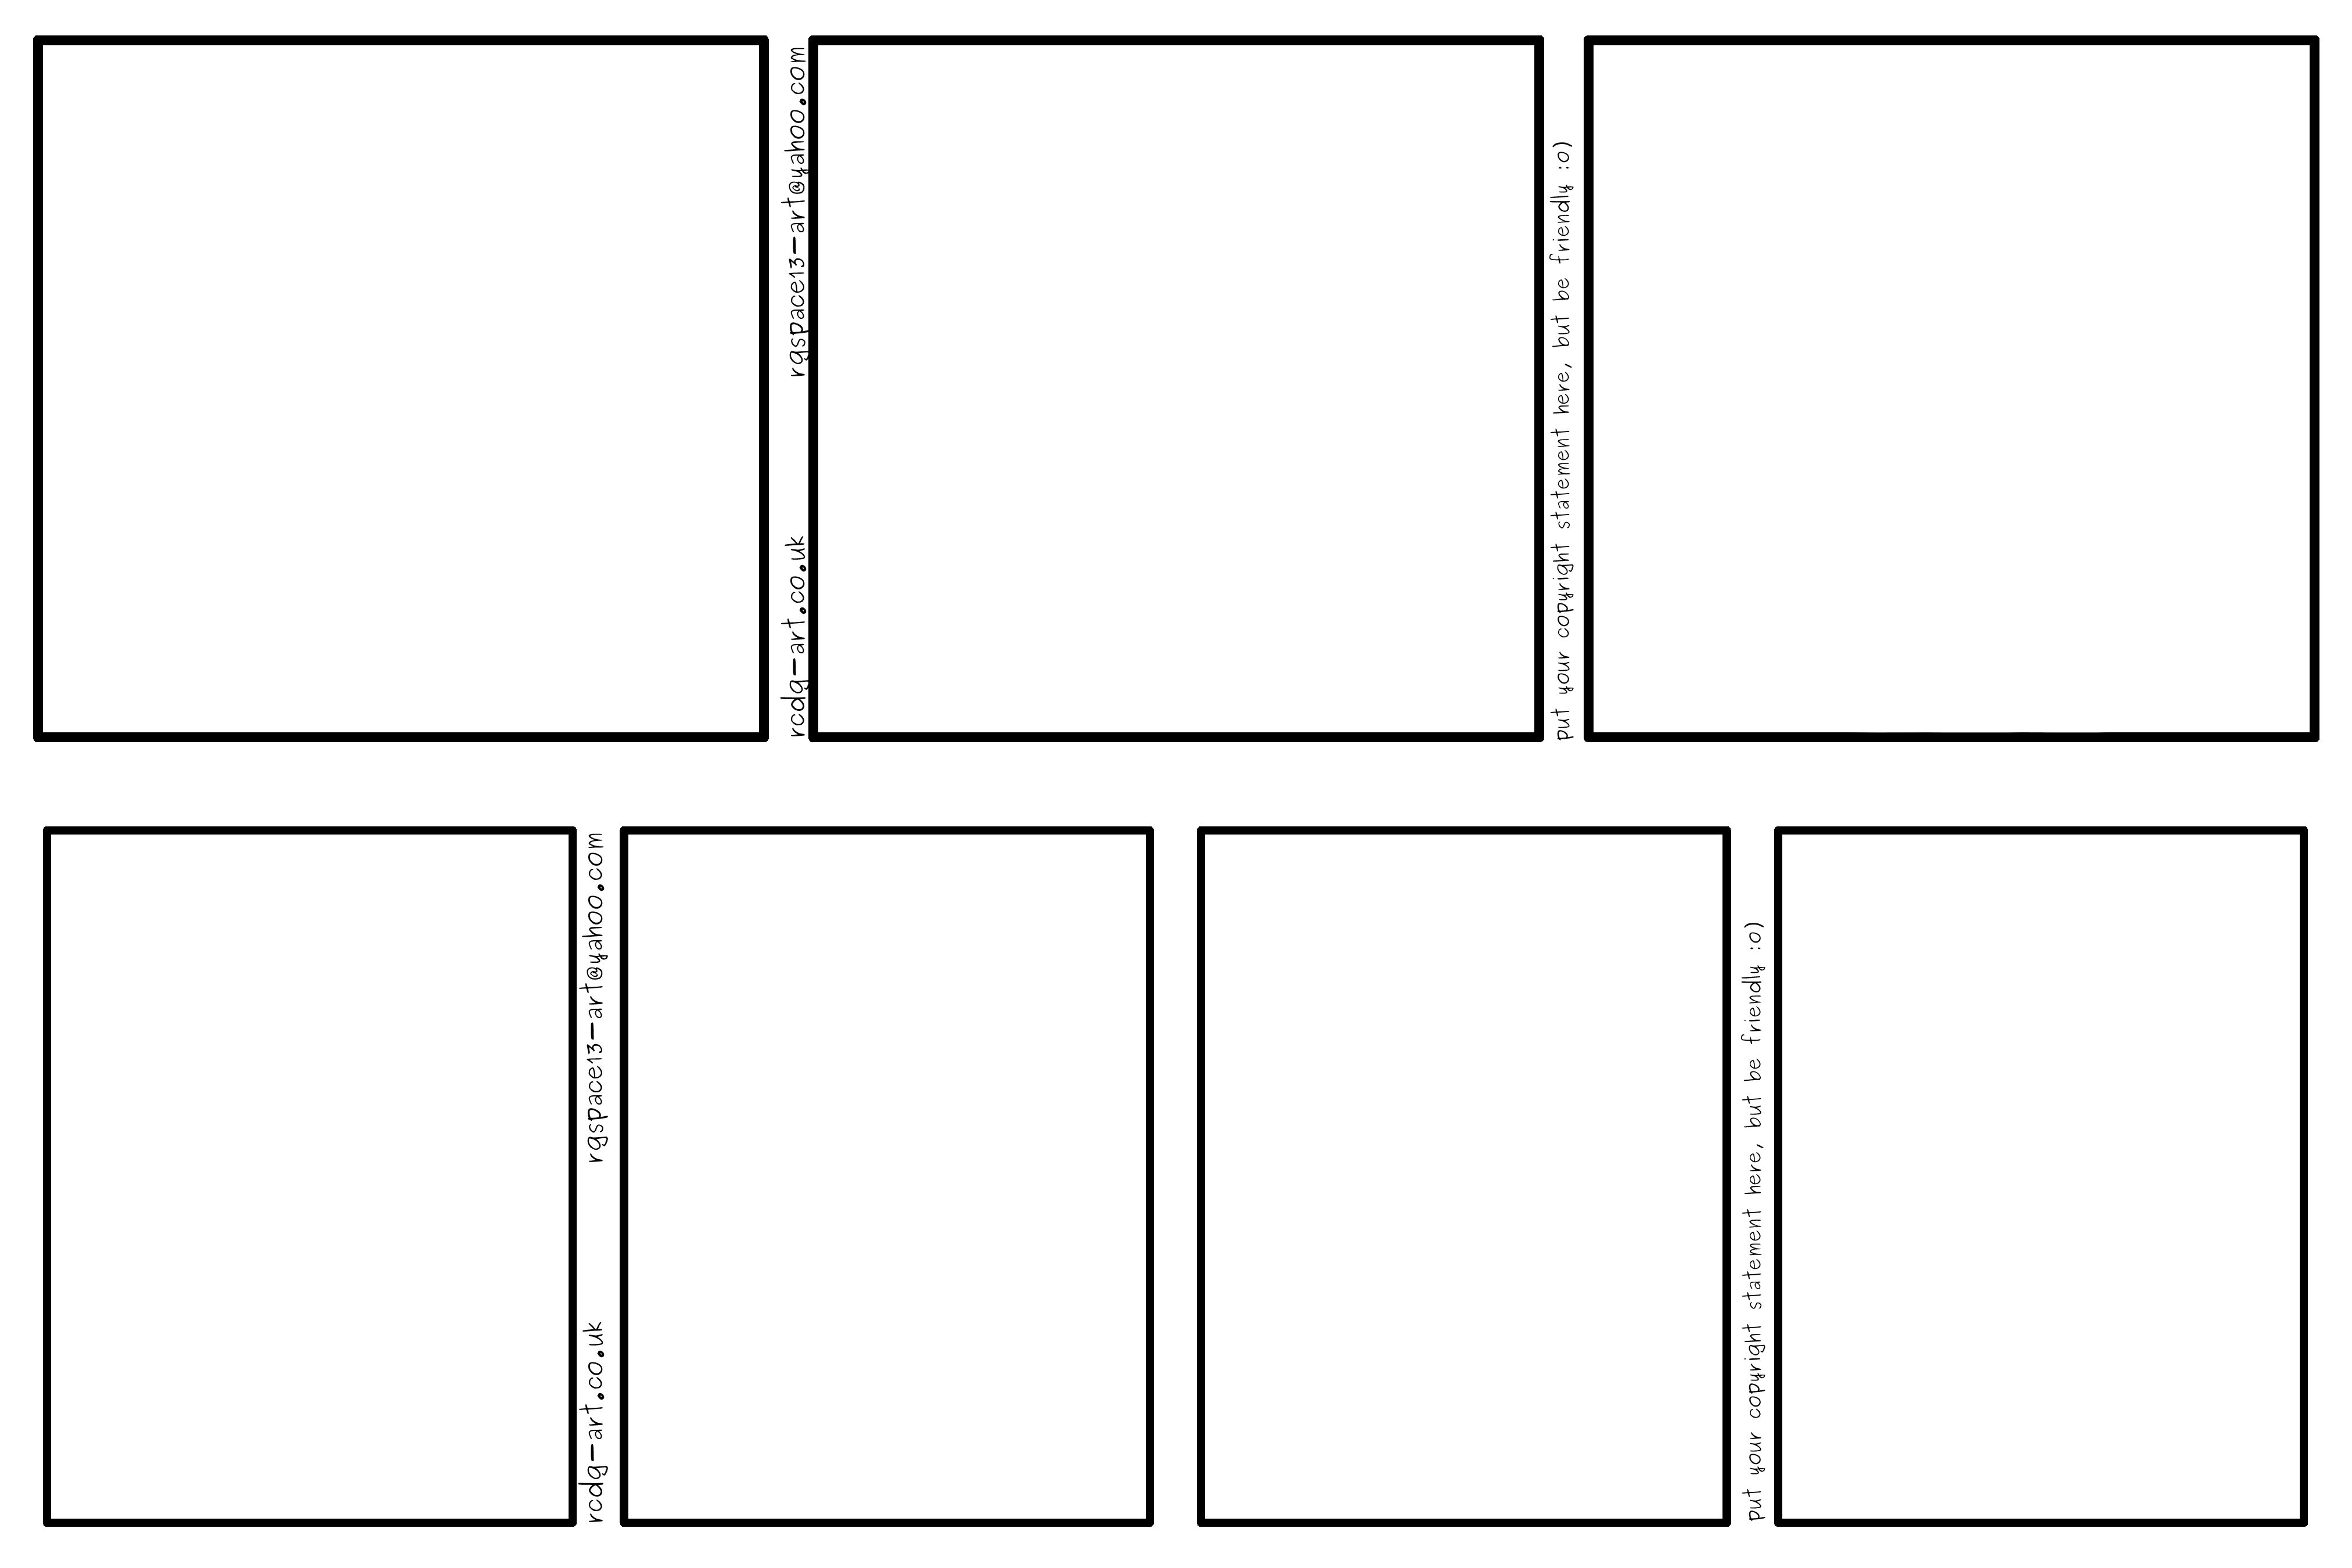  Comic  Strip  Templates  3  panel and 4 panel by rcdg on 